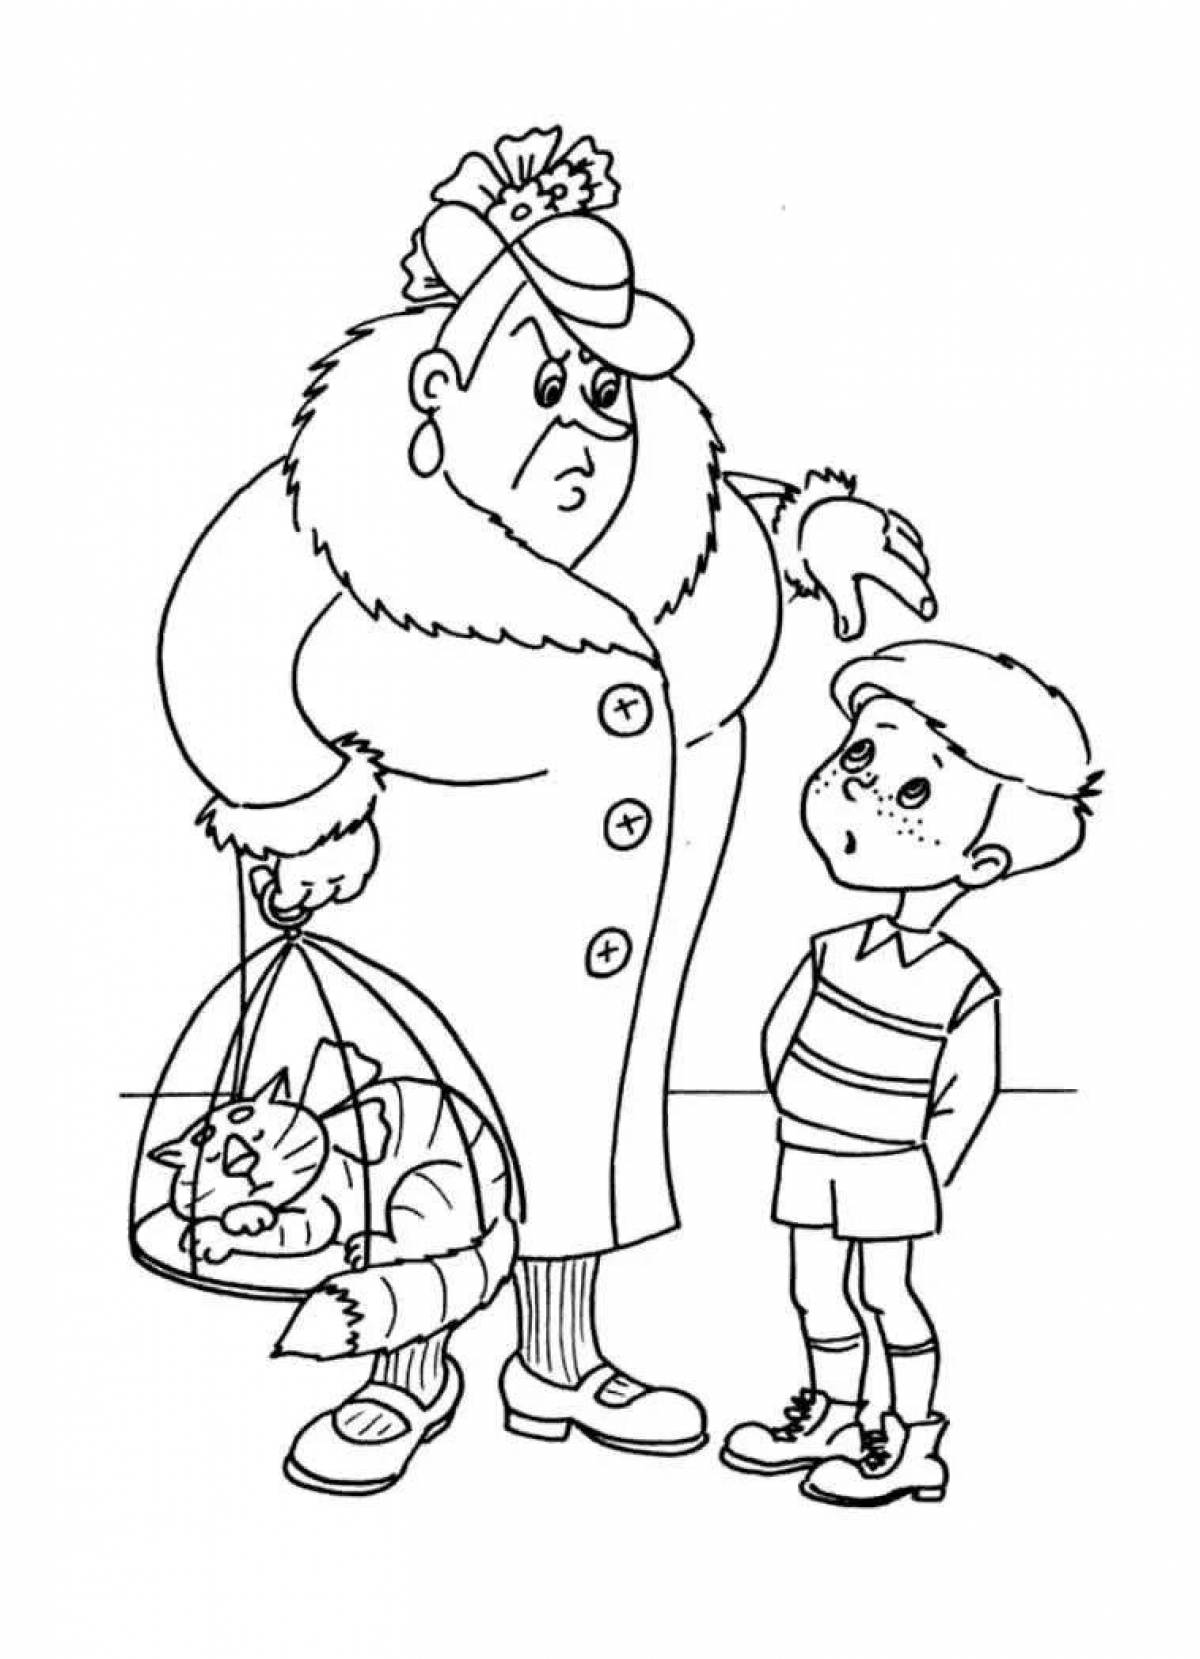 Coloring page amazing carlson is back